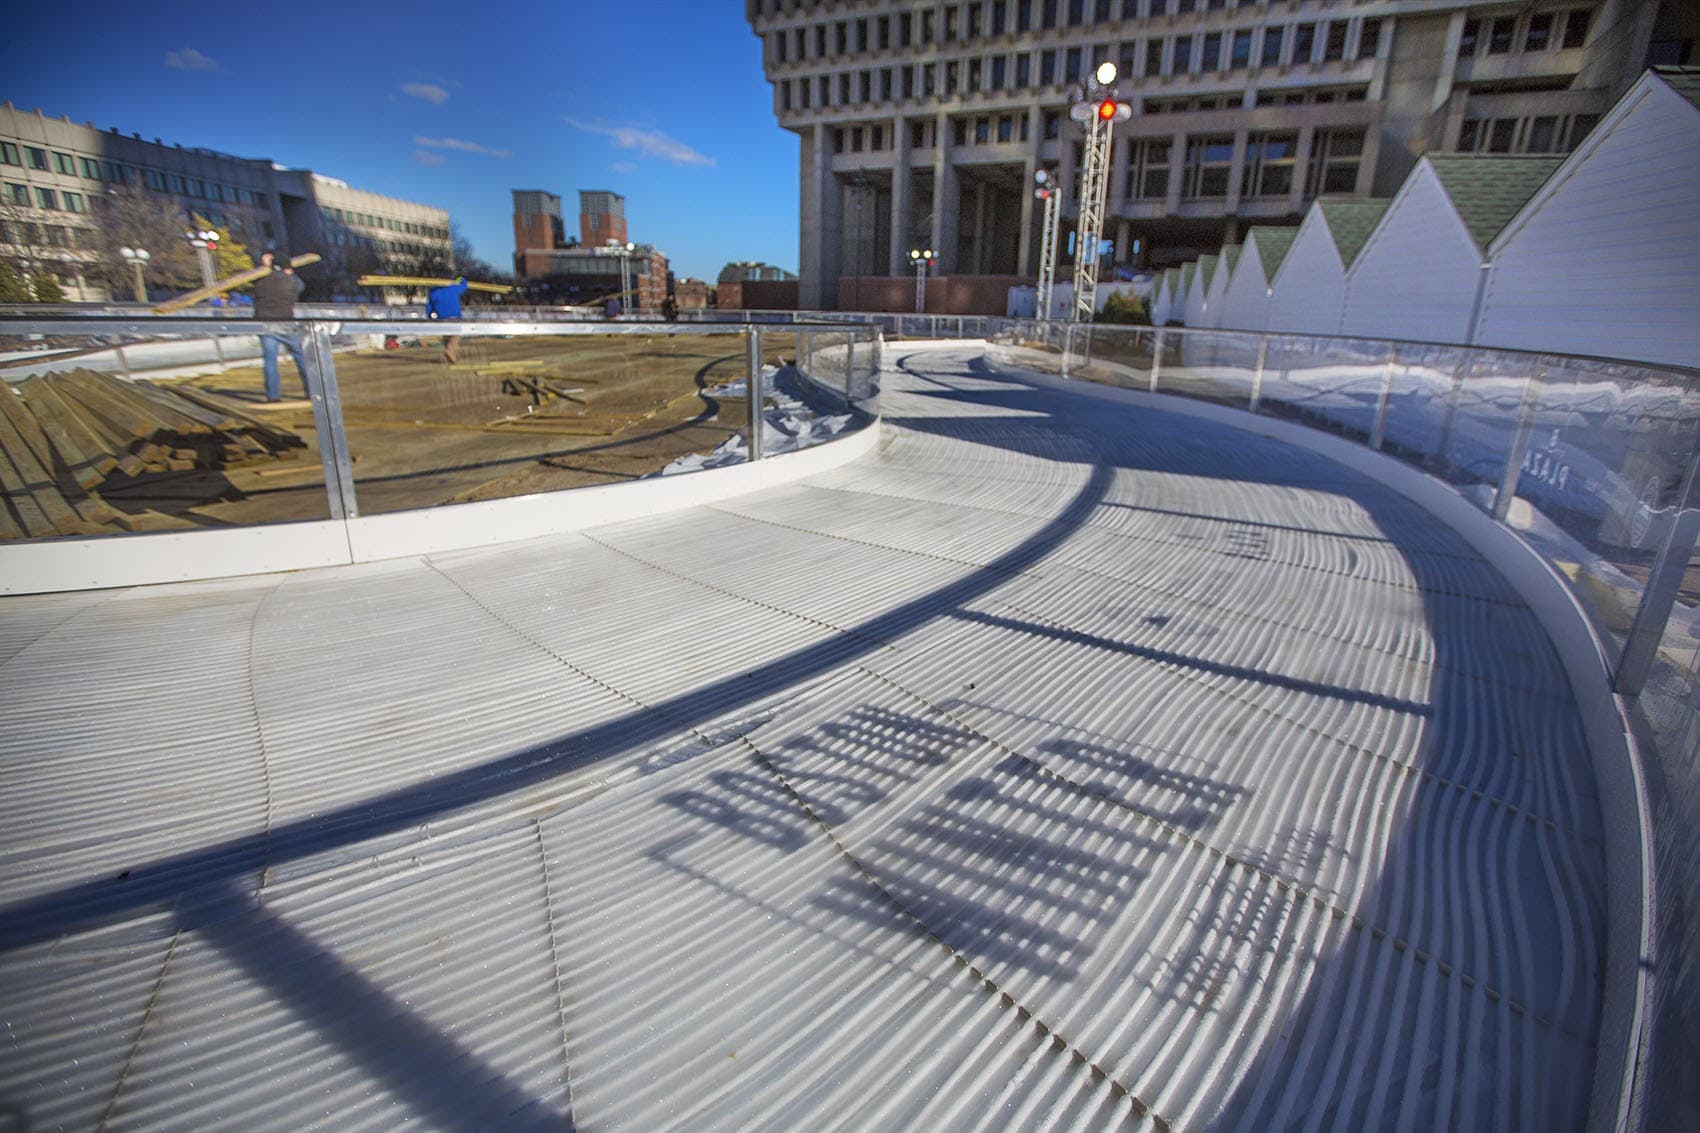 Workers finish putting together the skating rink for &quot;Boston Winter&quot; at City Hall Plaza last year. (Jesse Costa/WBUR)